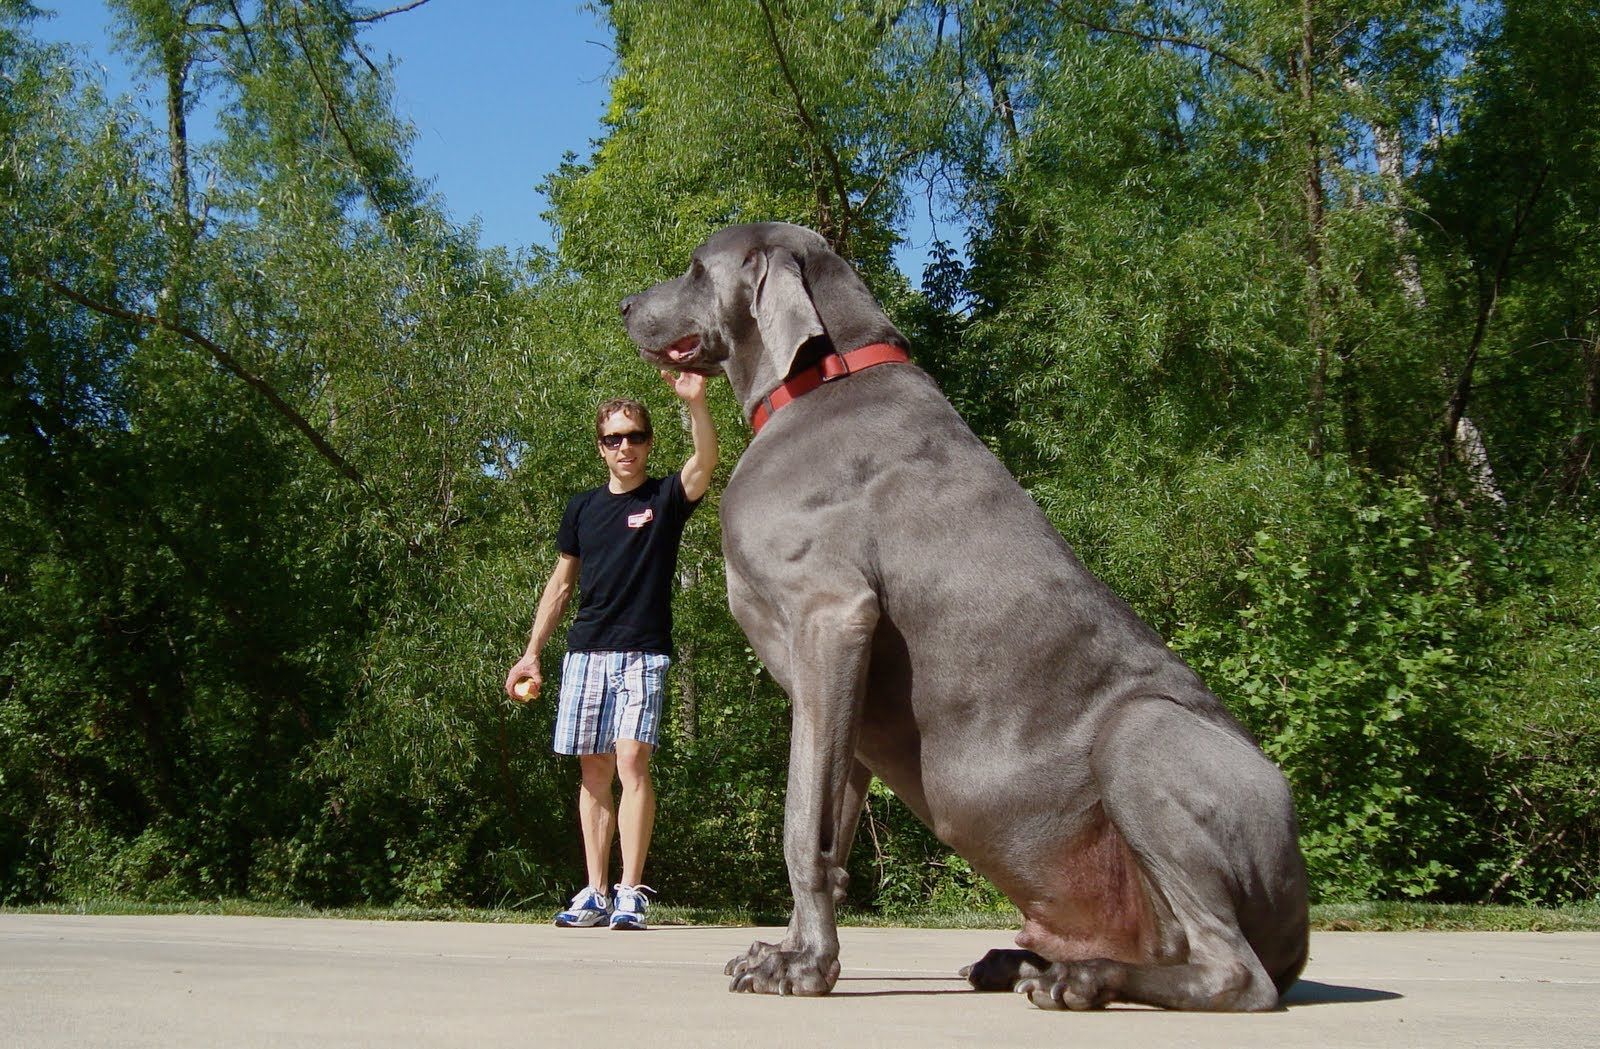 Astounding revelation: a colossal Pitbull of unprecedented size, standing at 3 meters tall and weighing 4000 pounds, emerges in the United Kingdom.